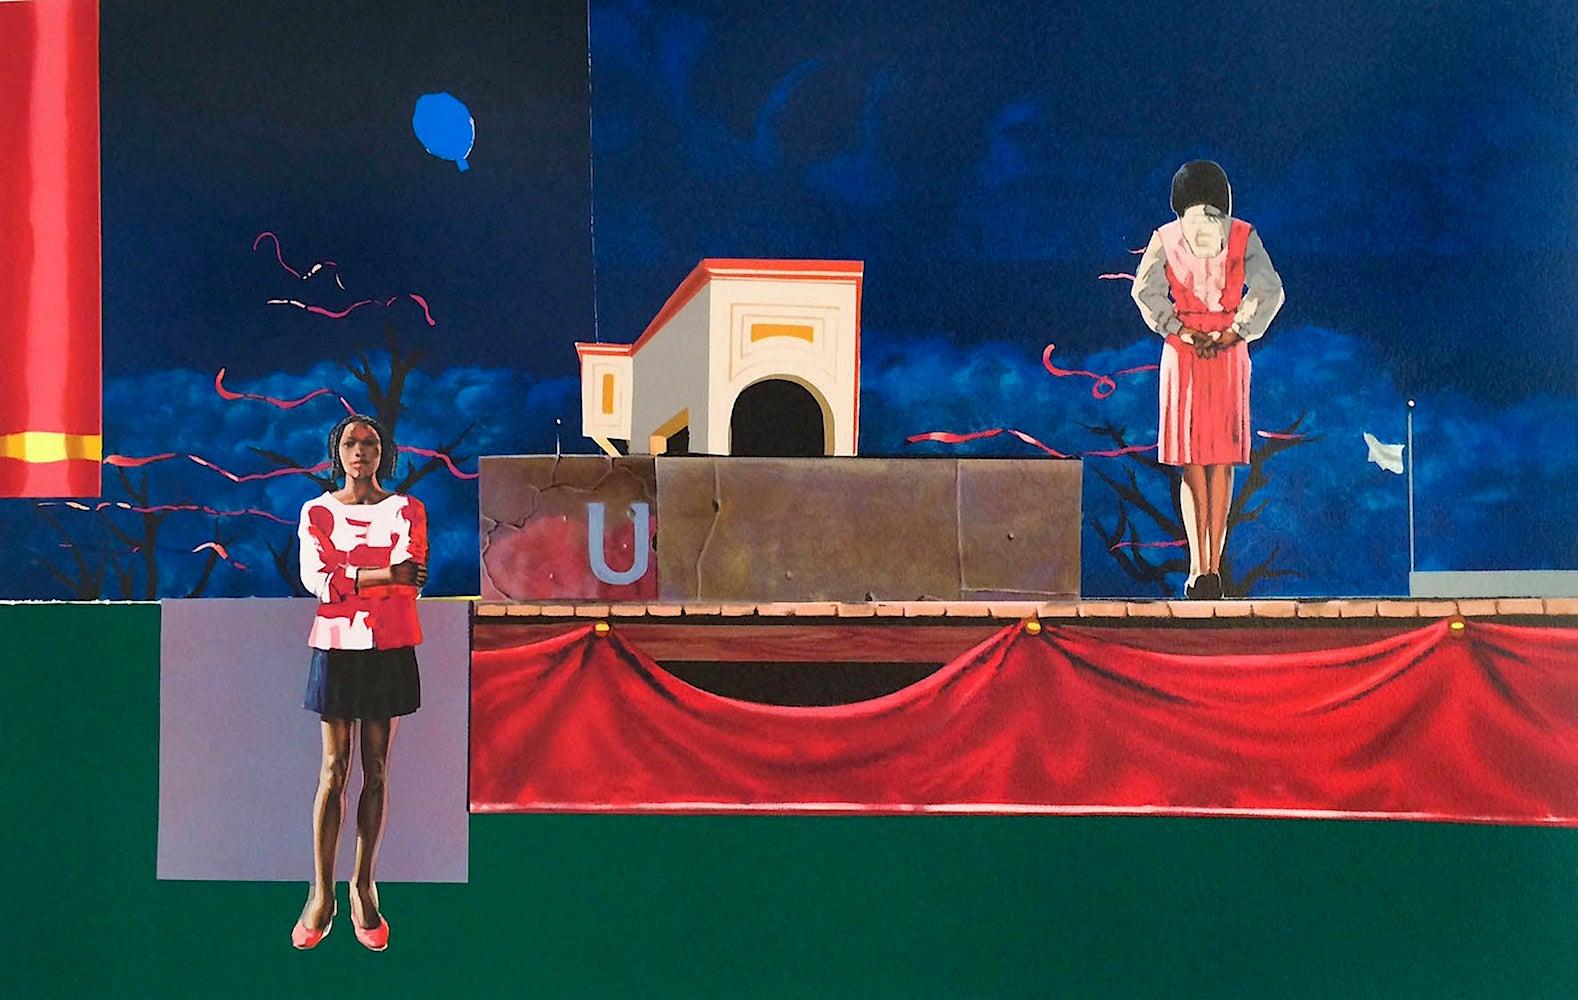 NOCTURNE Signed Lithograph Black Women Theater Stage Dark Blue Night Sky Balloon - Print by Hughie Lee-Smith